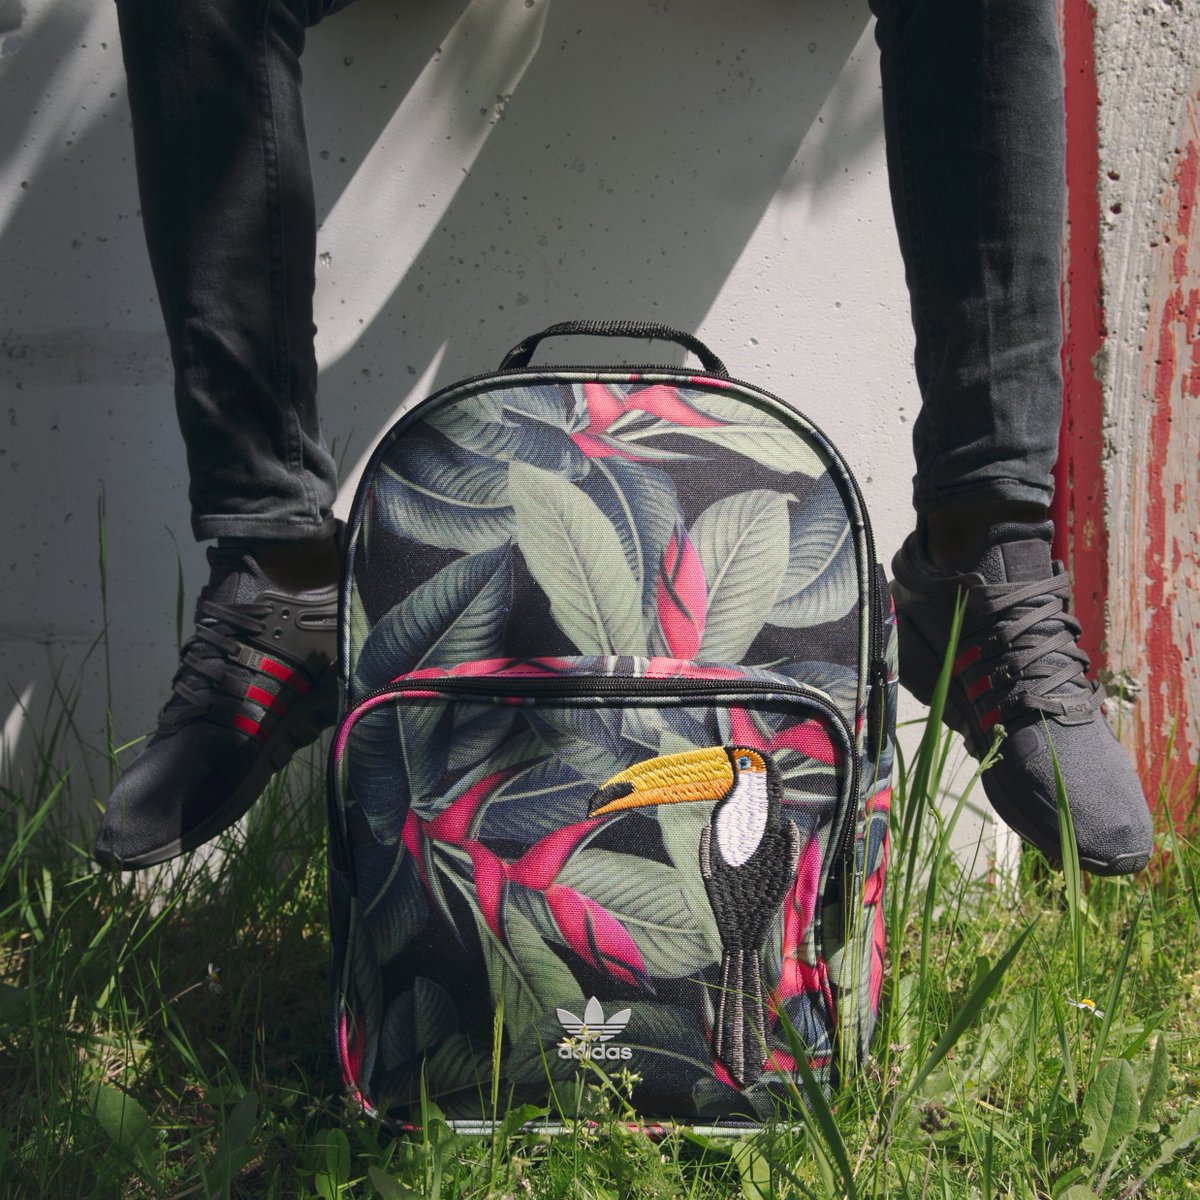 adidas toucan backpack